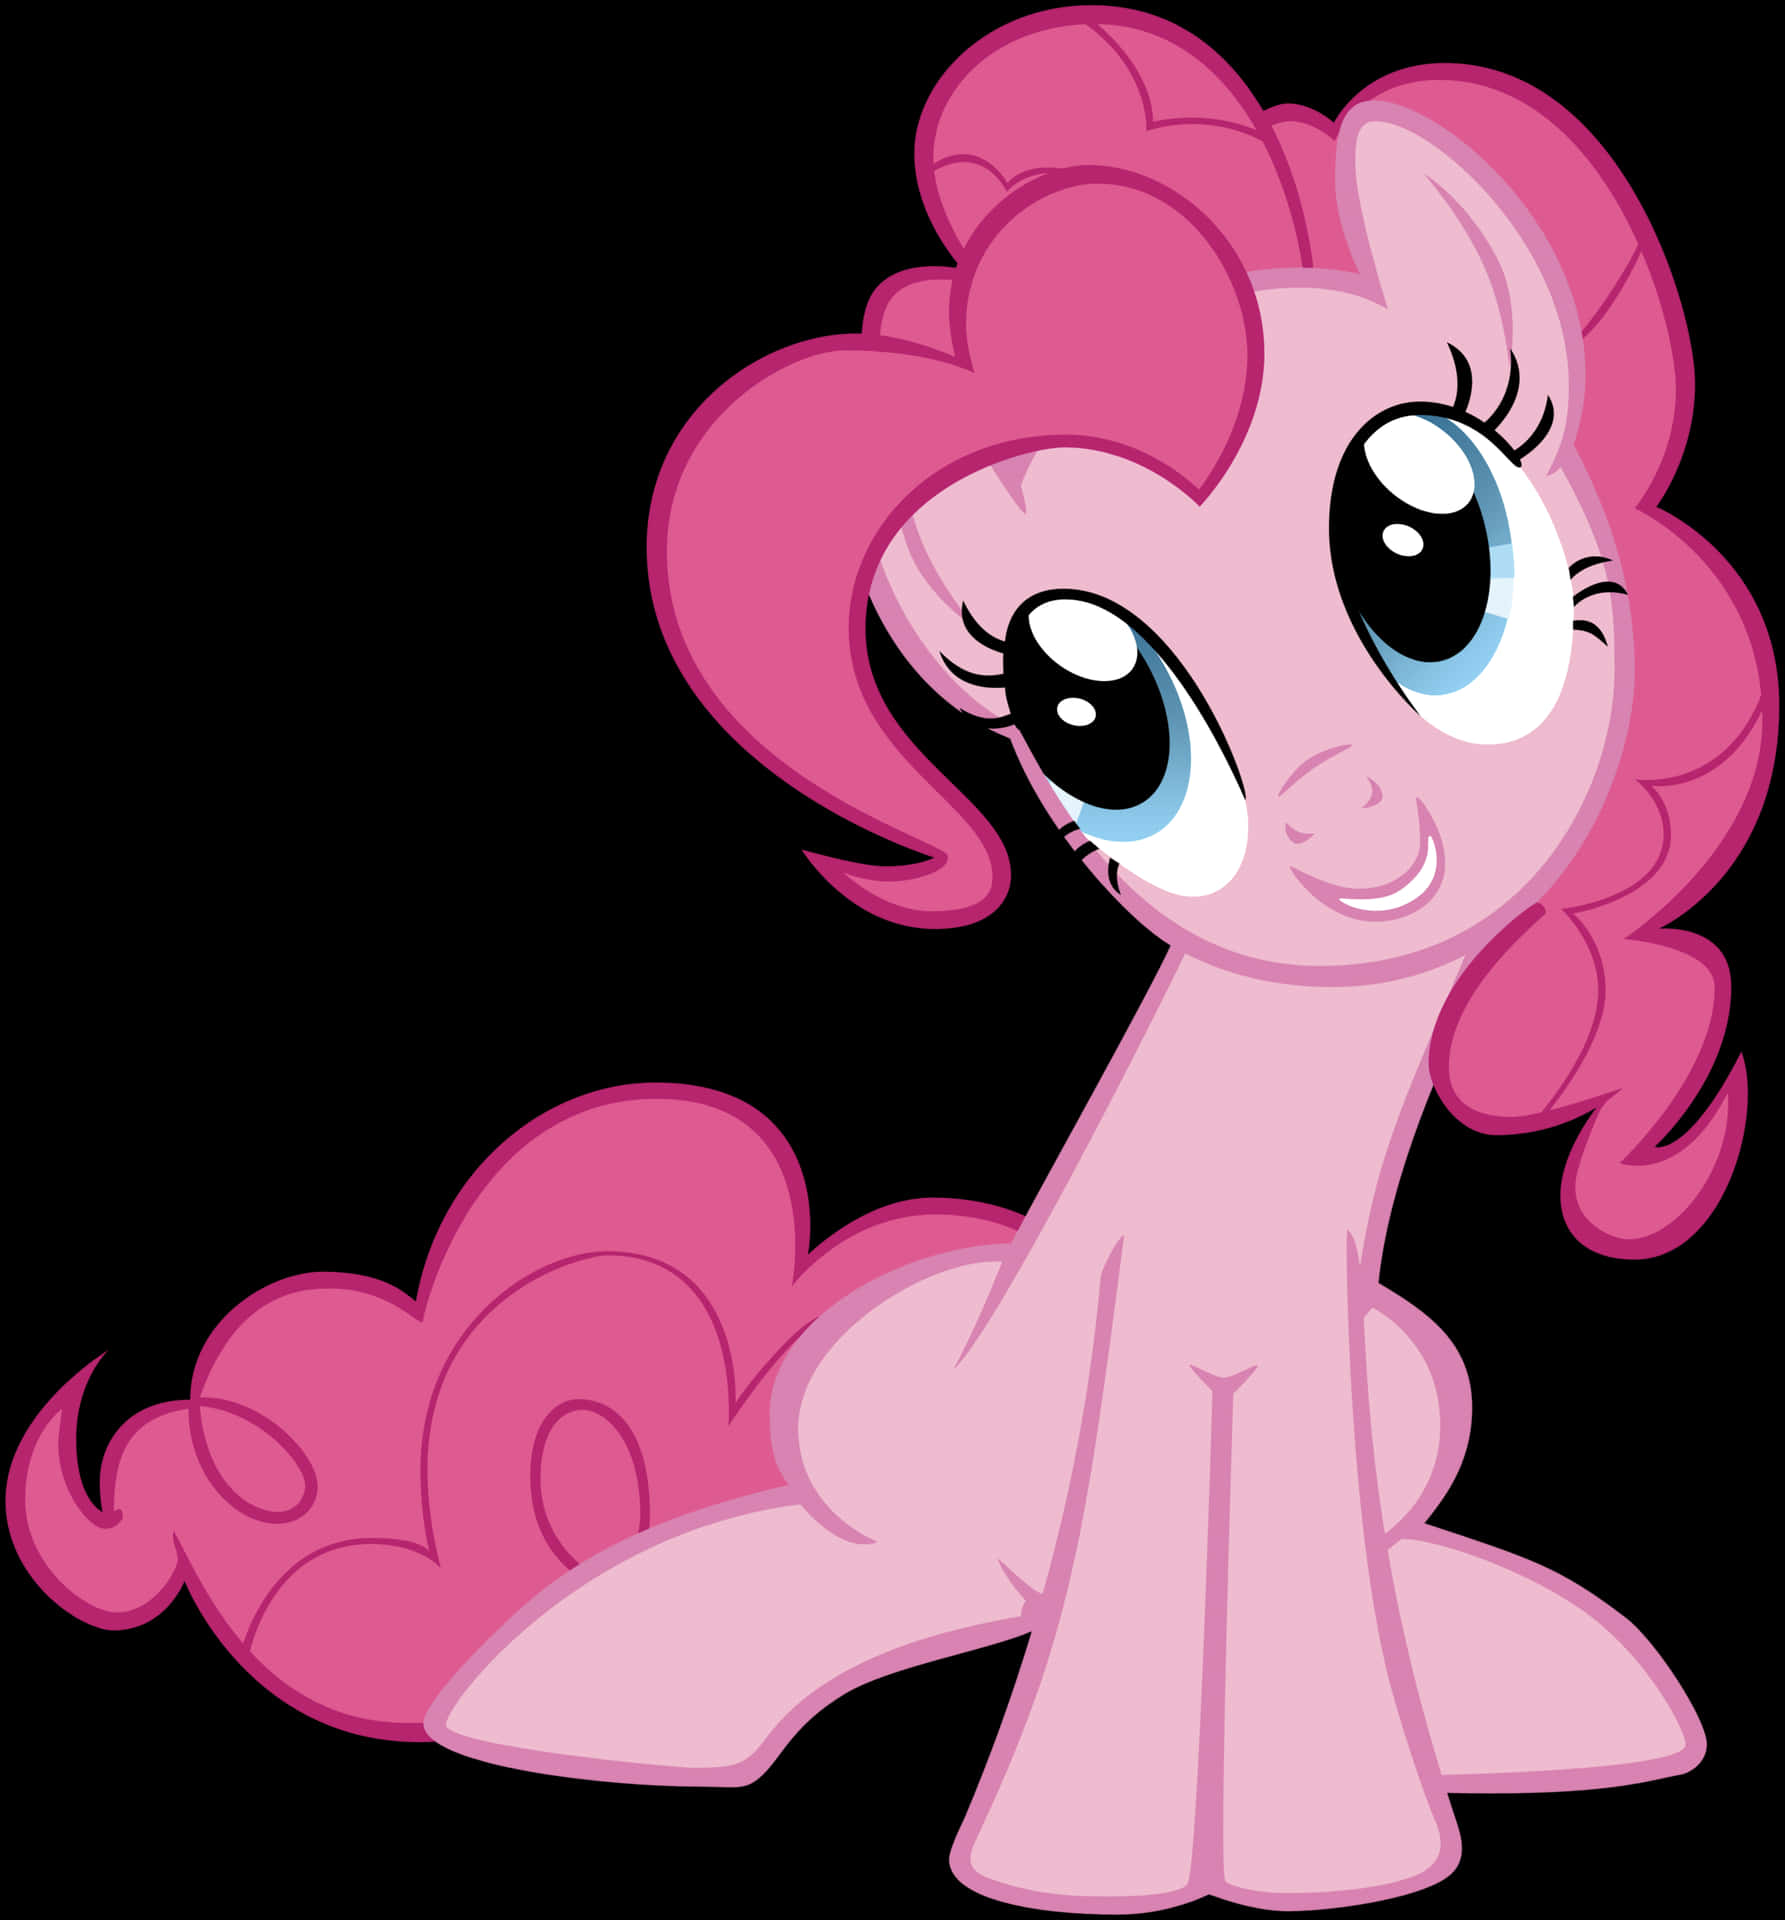 Pinkie Pie the bubbly and loving party pony